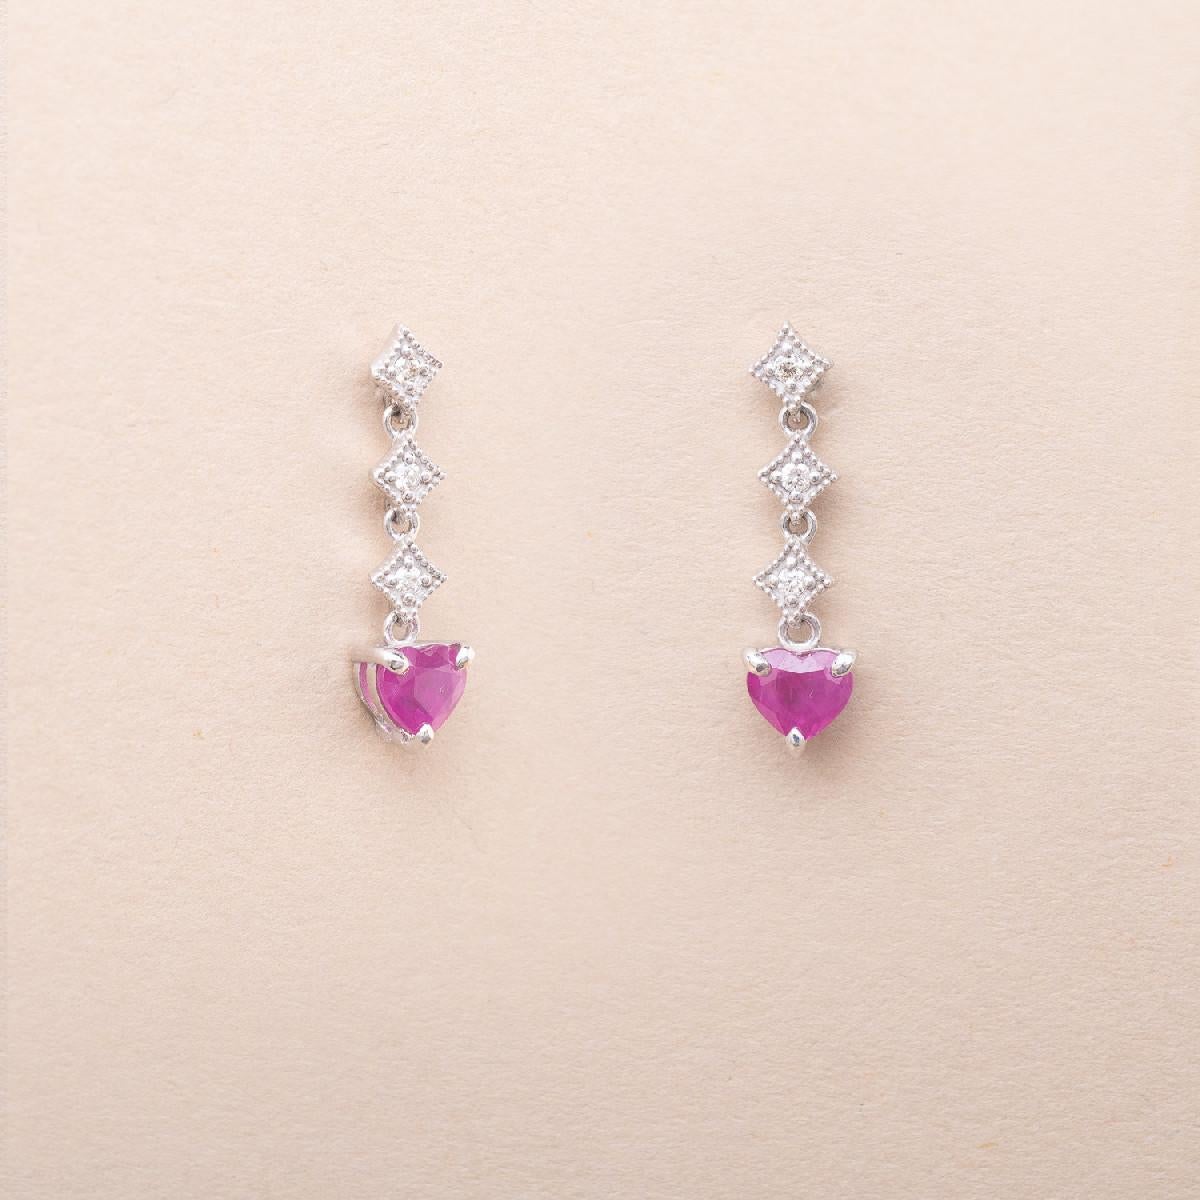 18K white gold dangle earrings set with six modern cut diamonds and two heart-shaped rubies. 

Rubies' estimated weight : 0.45 carat
Diamonds' estimated weight : 0.07 carat

Length : 2 cm

Total gross weight : 1.90 g